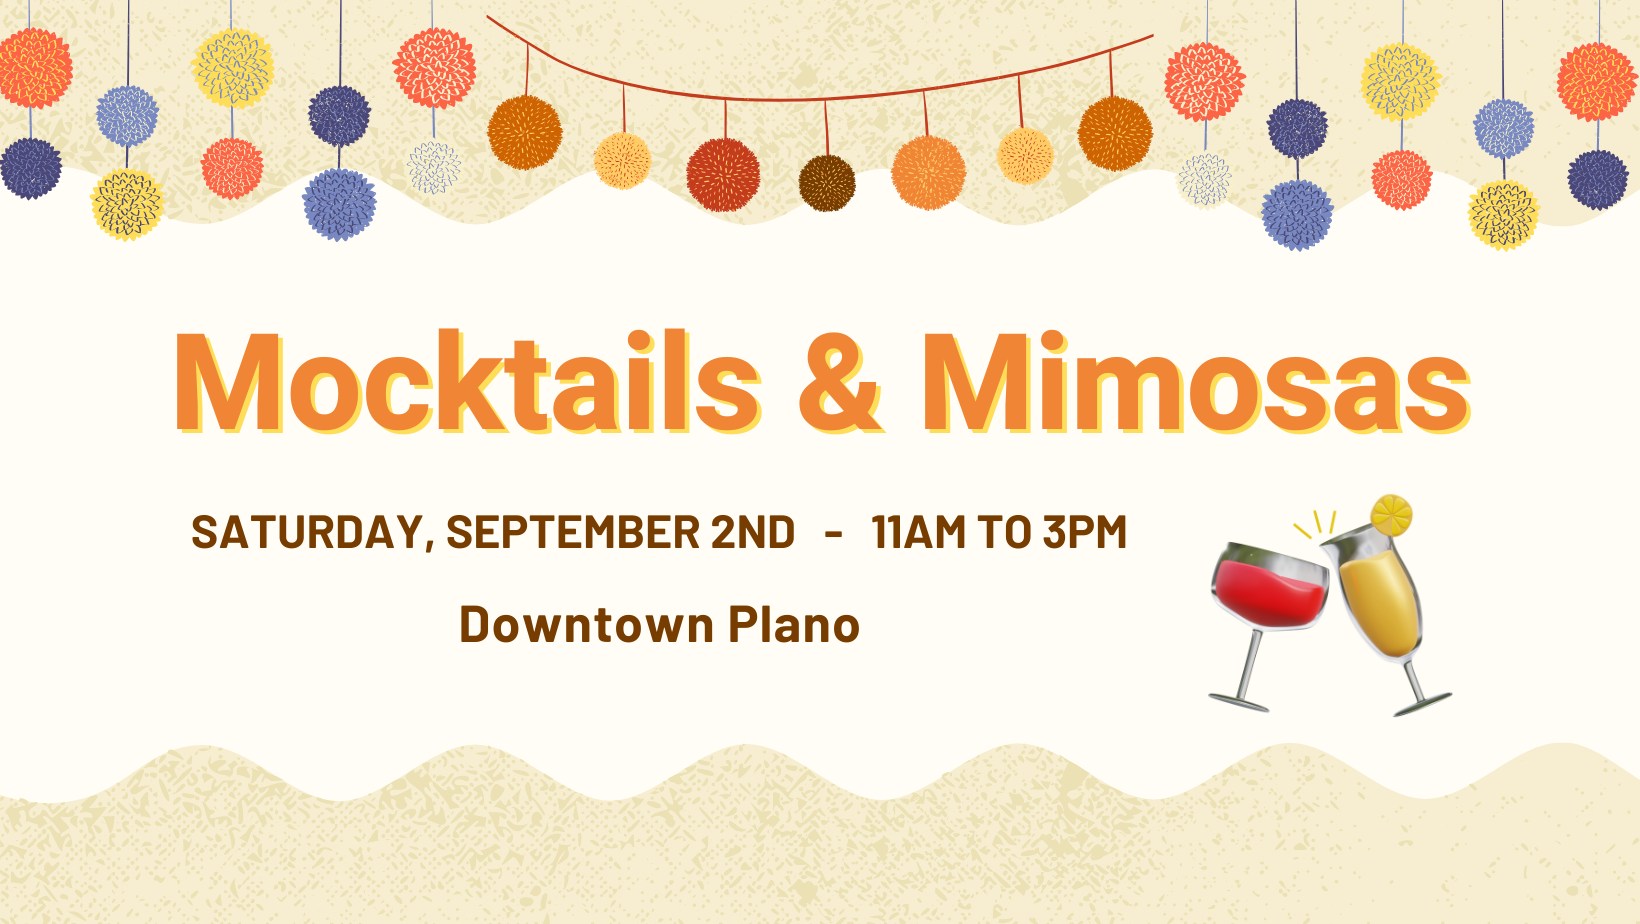 Mocktails & Mimosas in Downtown Plano